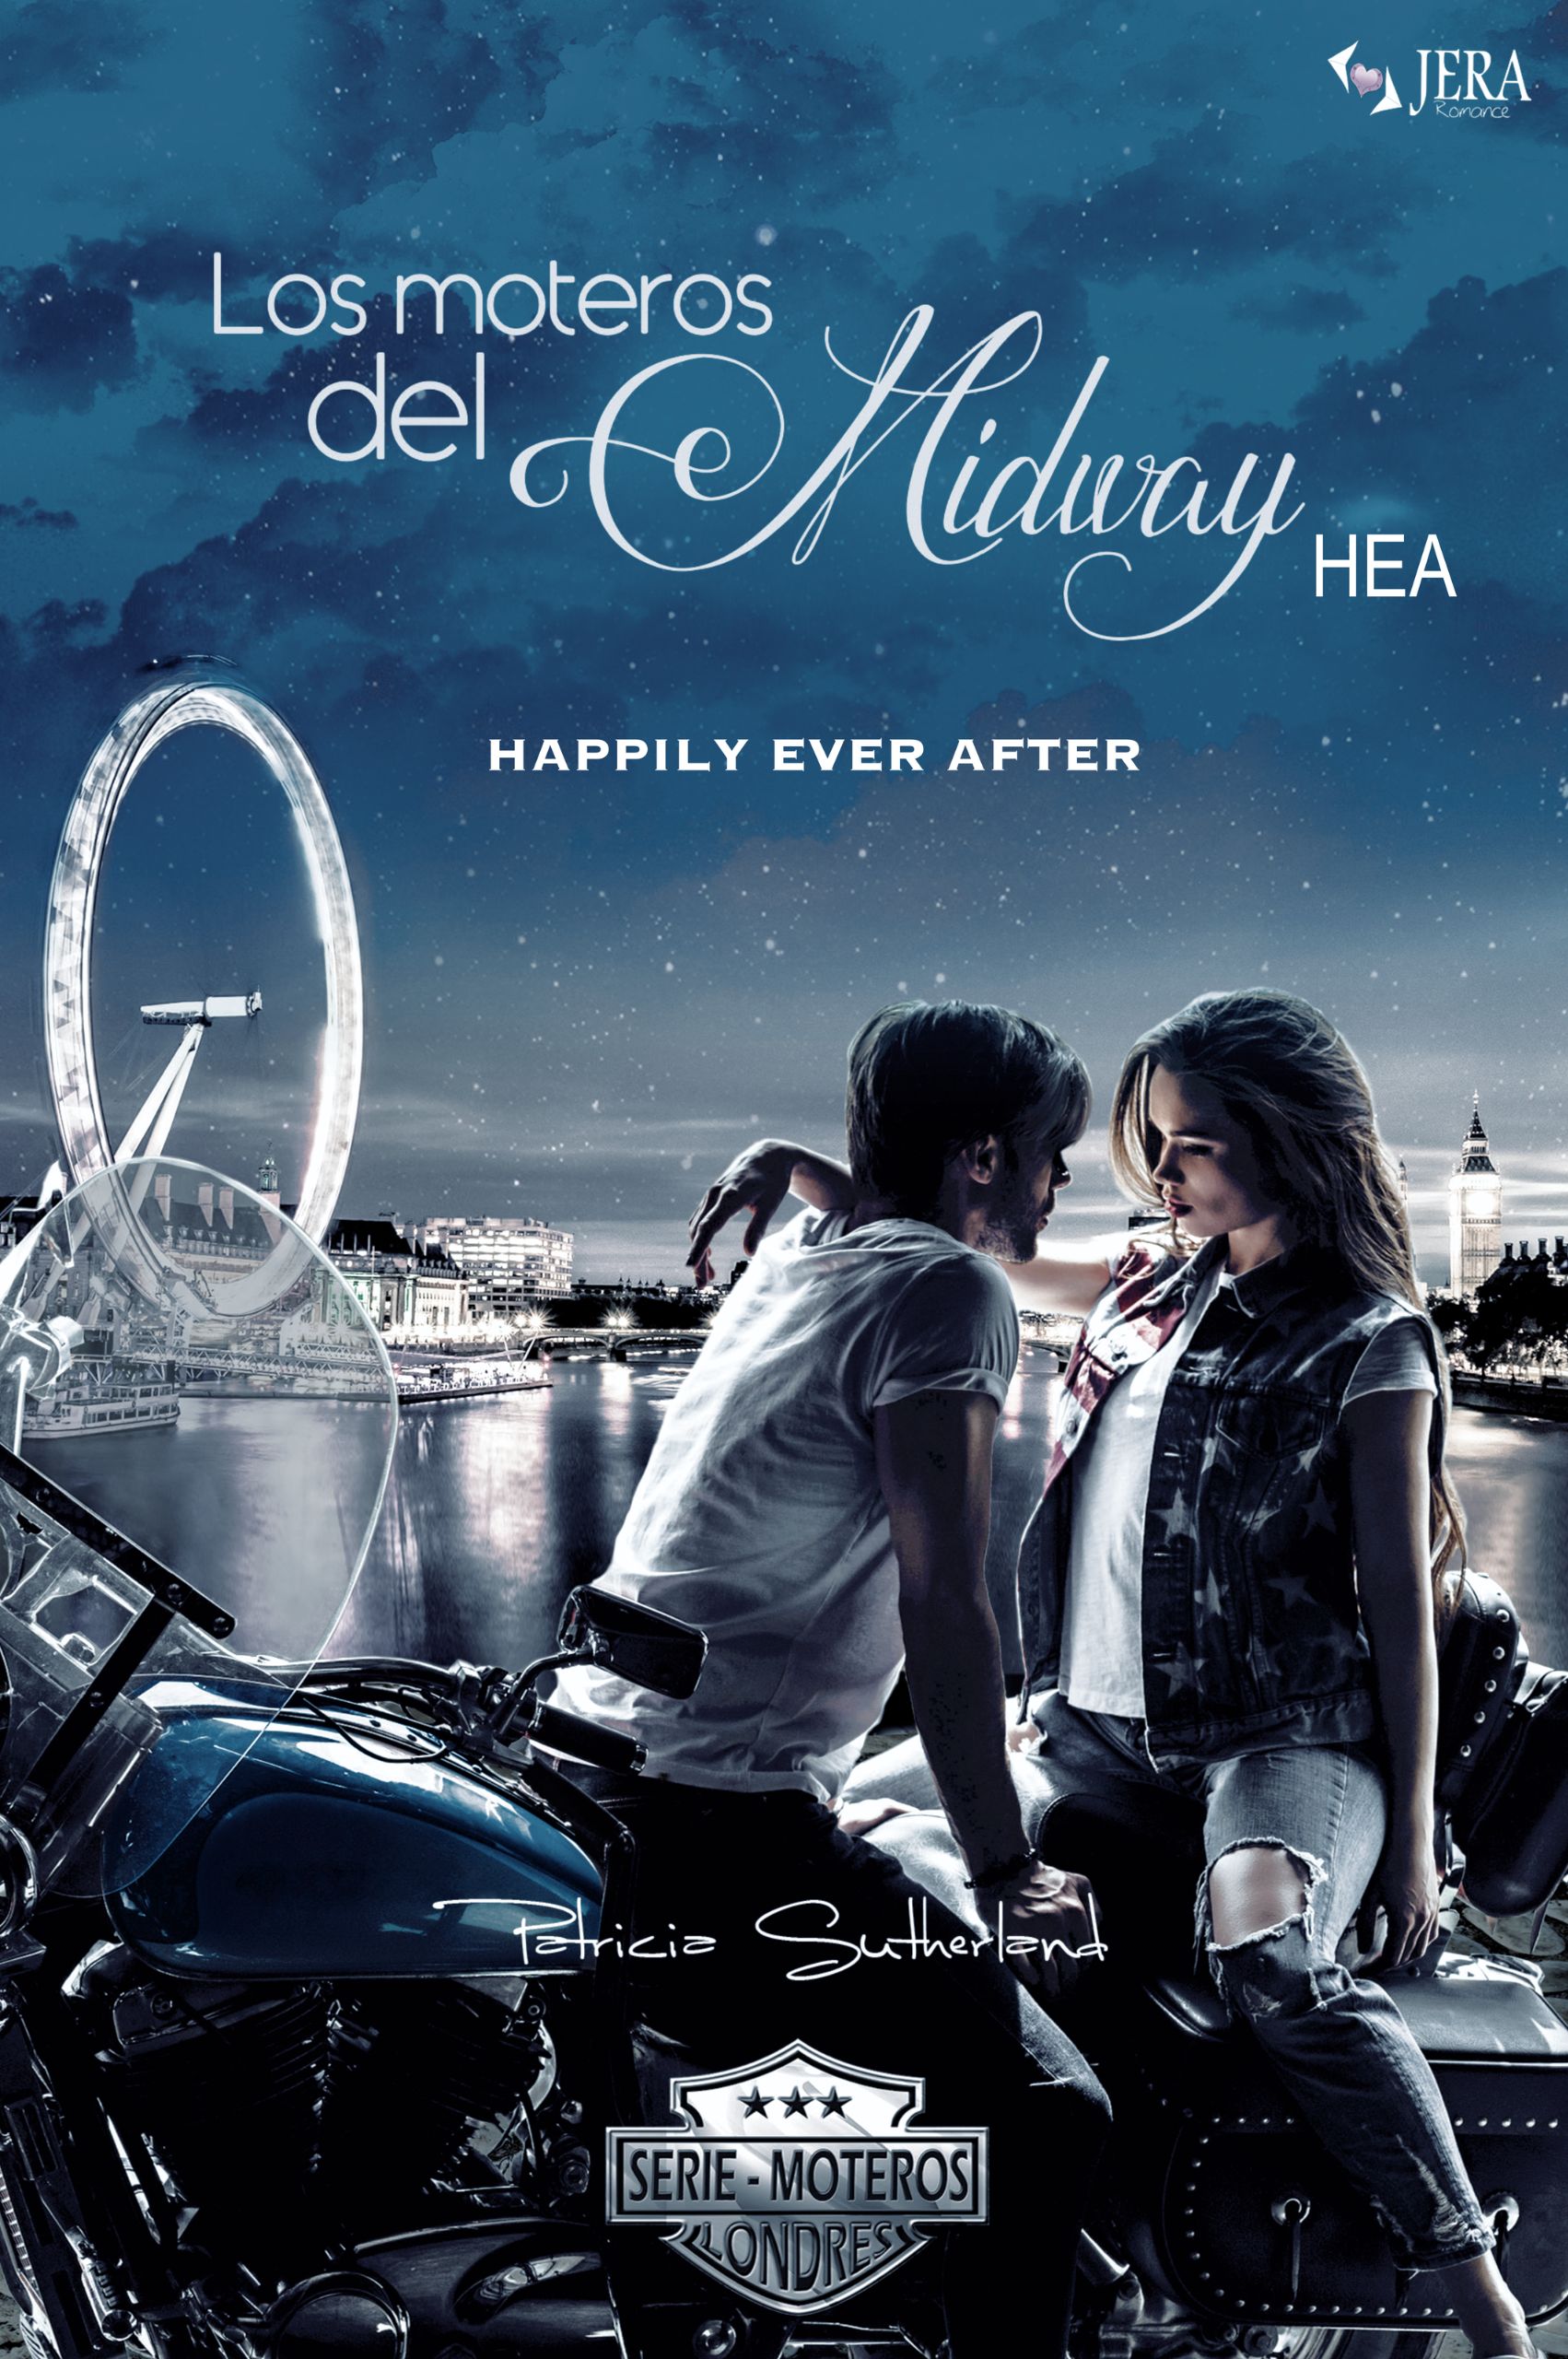 Los moteros del MidWay, HEA (Happily Ever After)